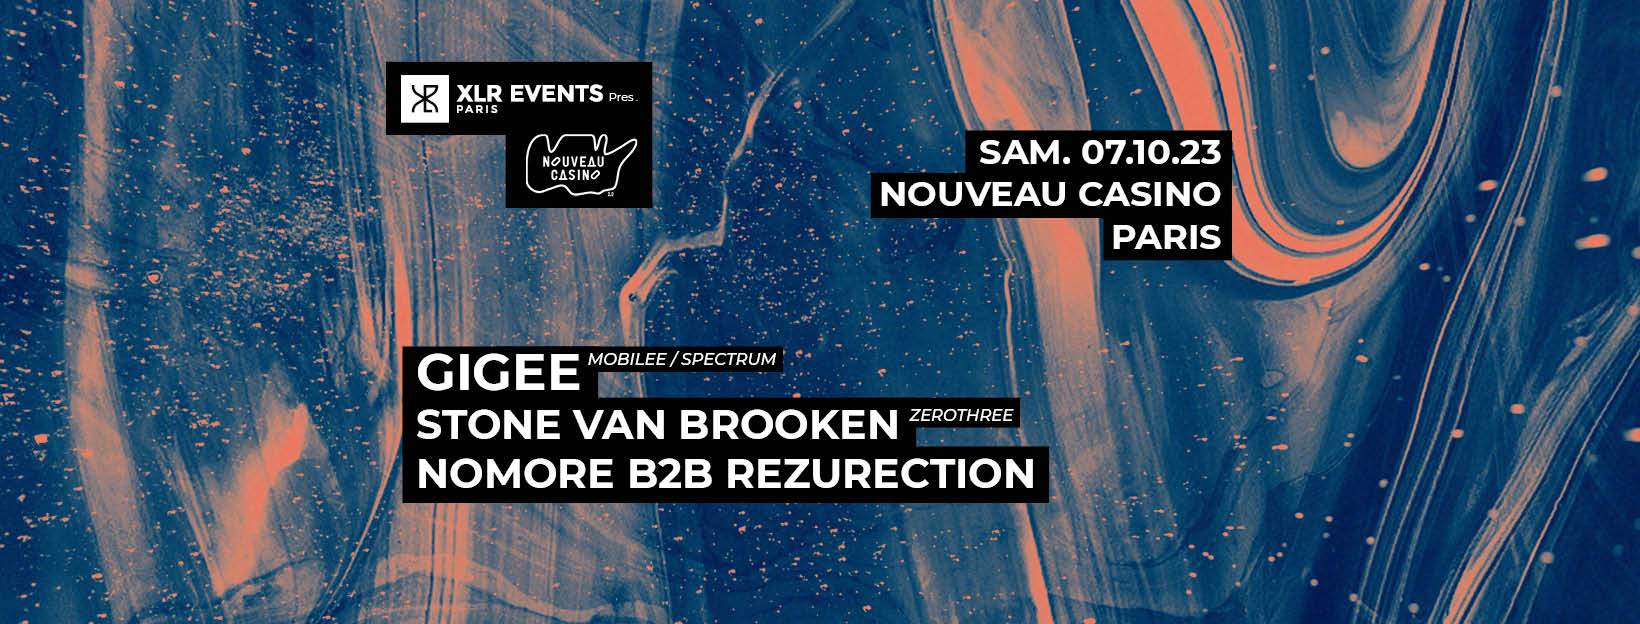 XLR Events pres. GIGEE, STONE VAN BROKEN & Guests - Melodic House & Techno Night– PARIS - フライヤー表